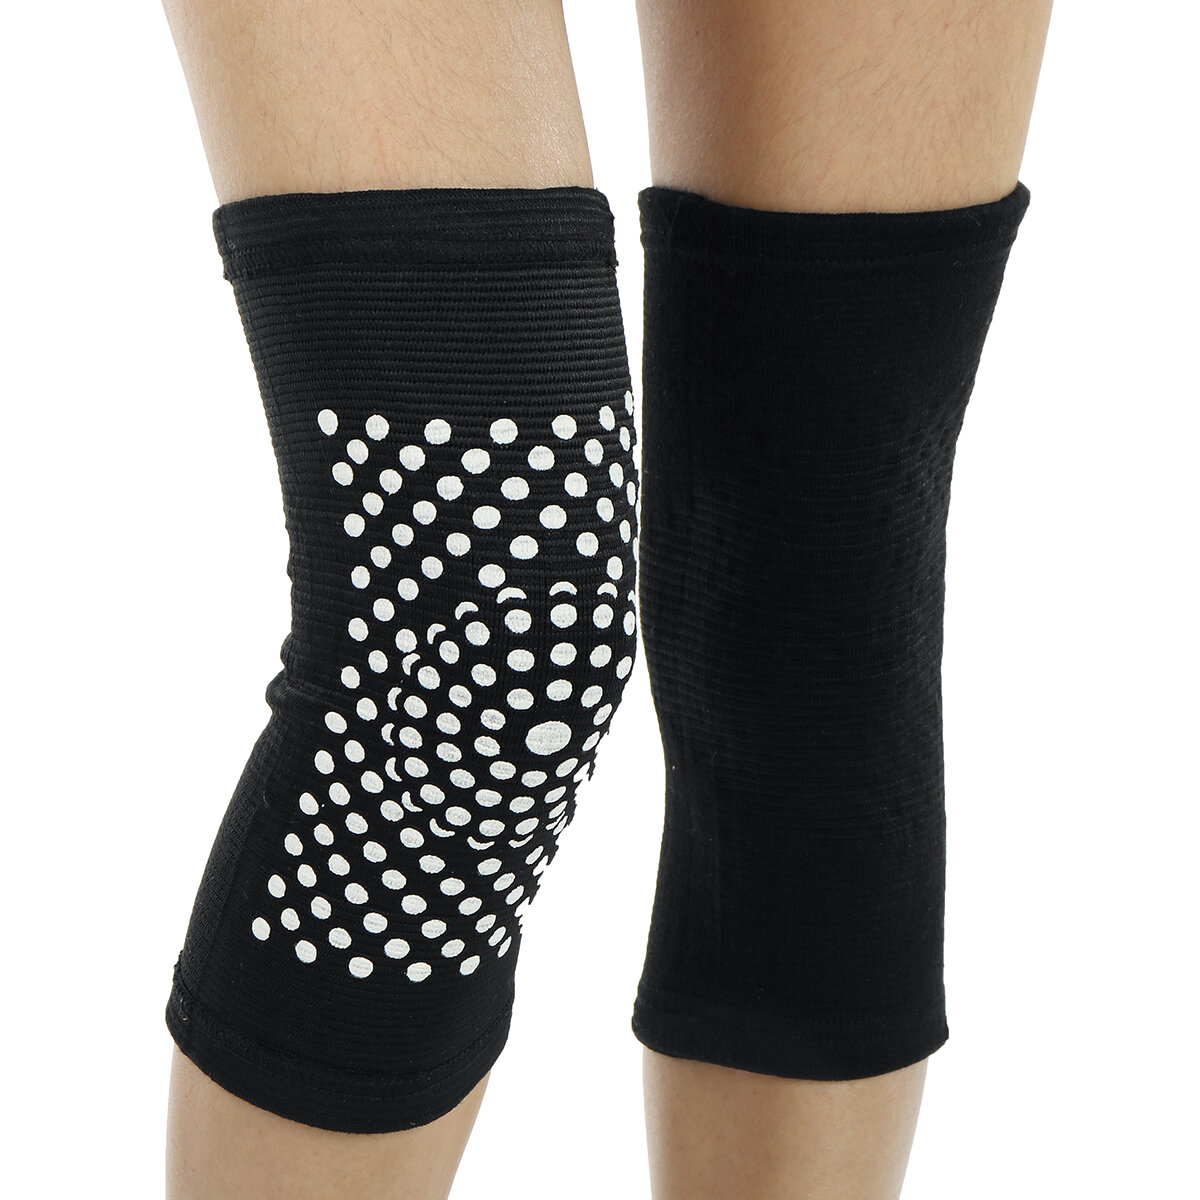 M/L/XL Pair Self Heating Knee Pads Magnetic Therapy Pain Relief Arthritis Brace